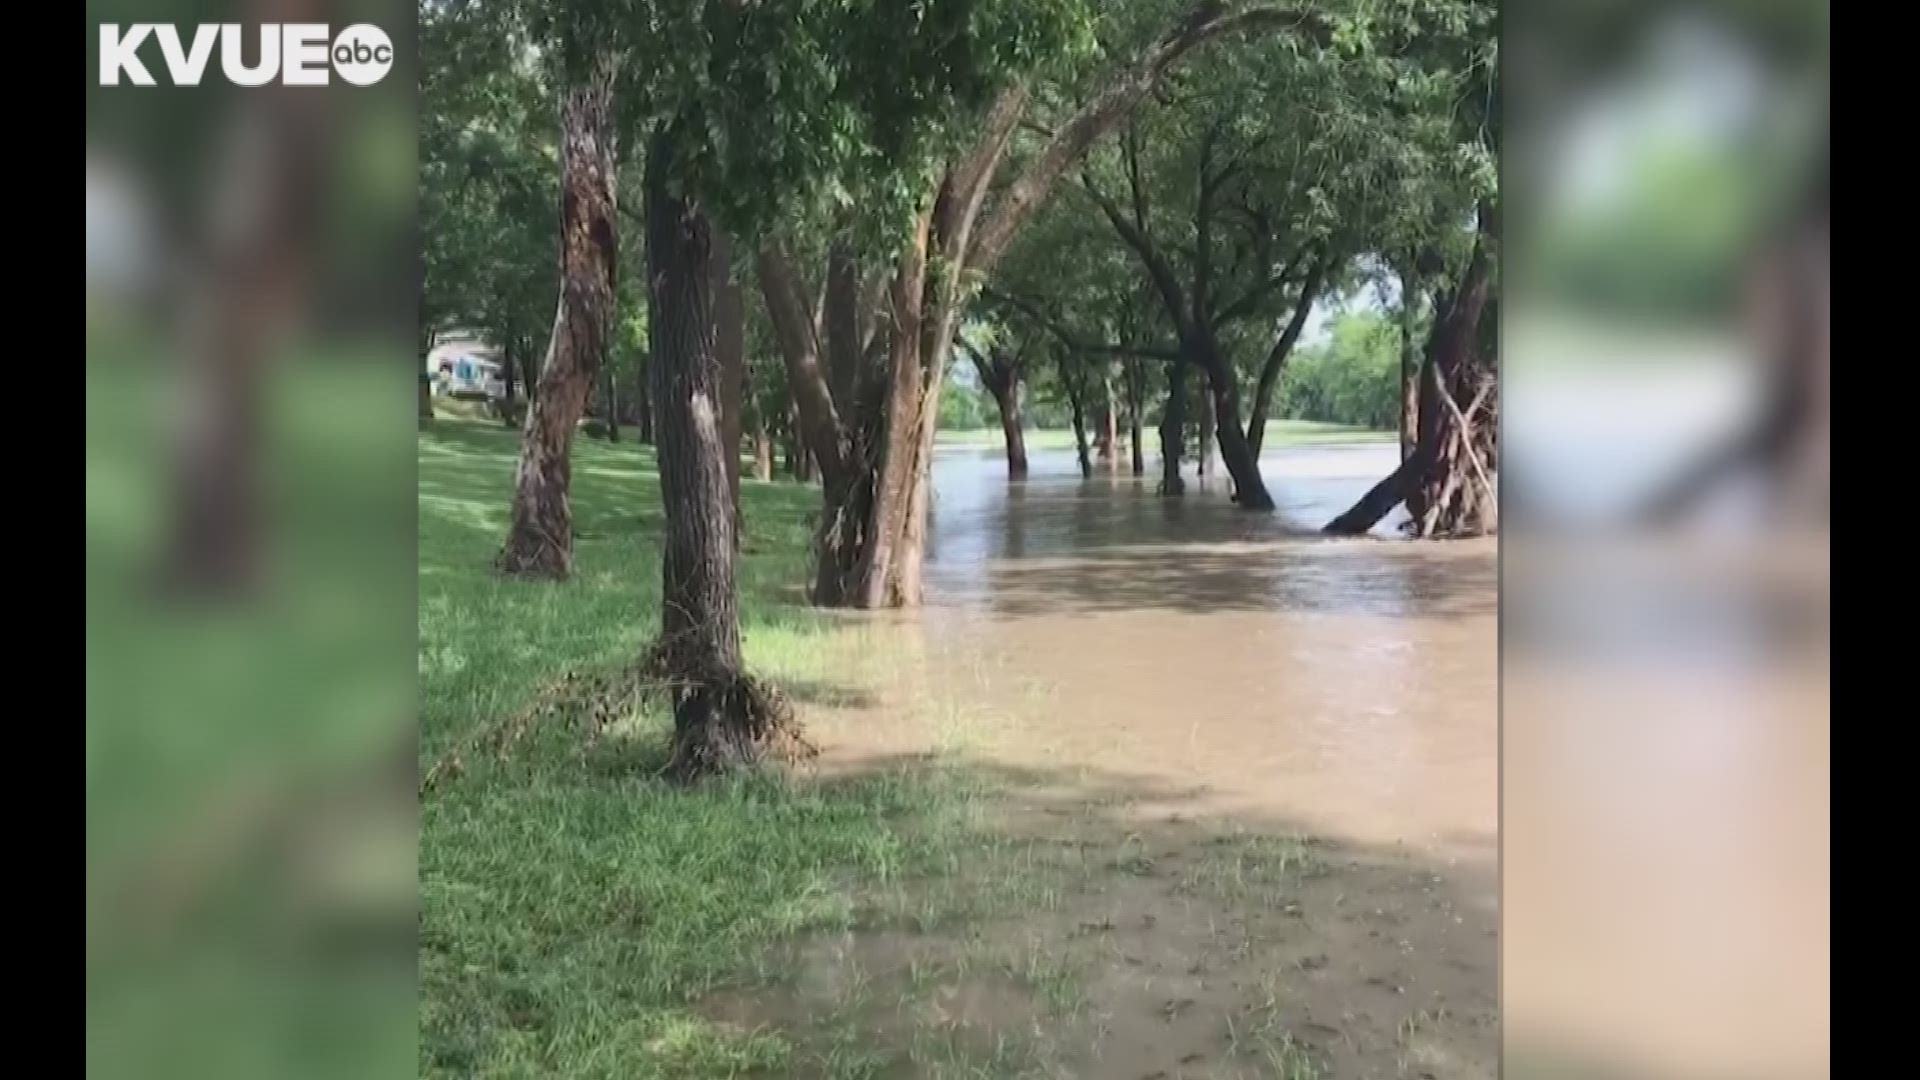 Jeremy Clark shared this video of flooding at Onion Creek Golf Course in Austin on Wednesday.